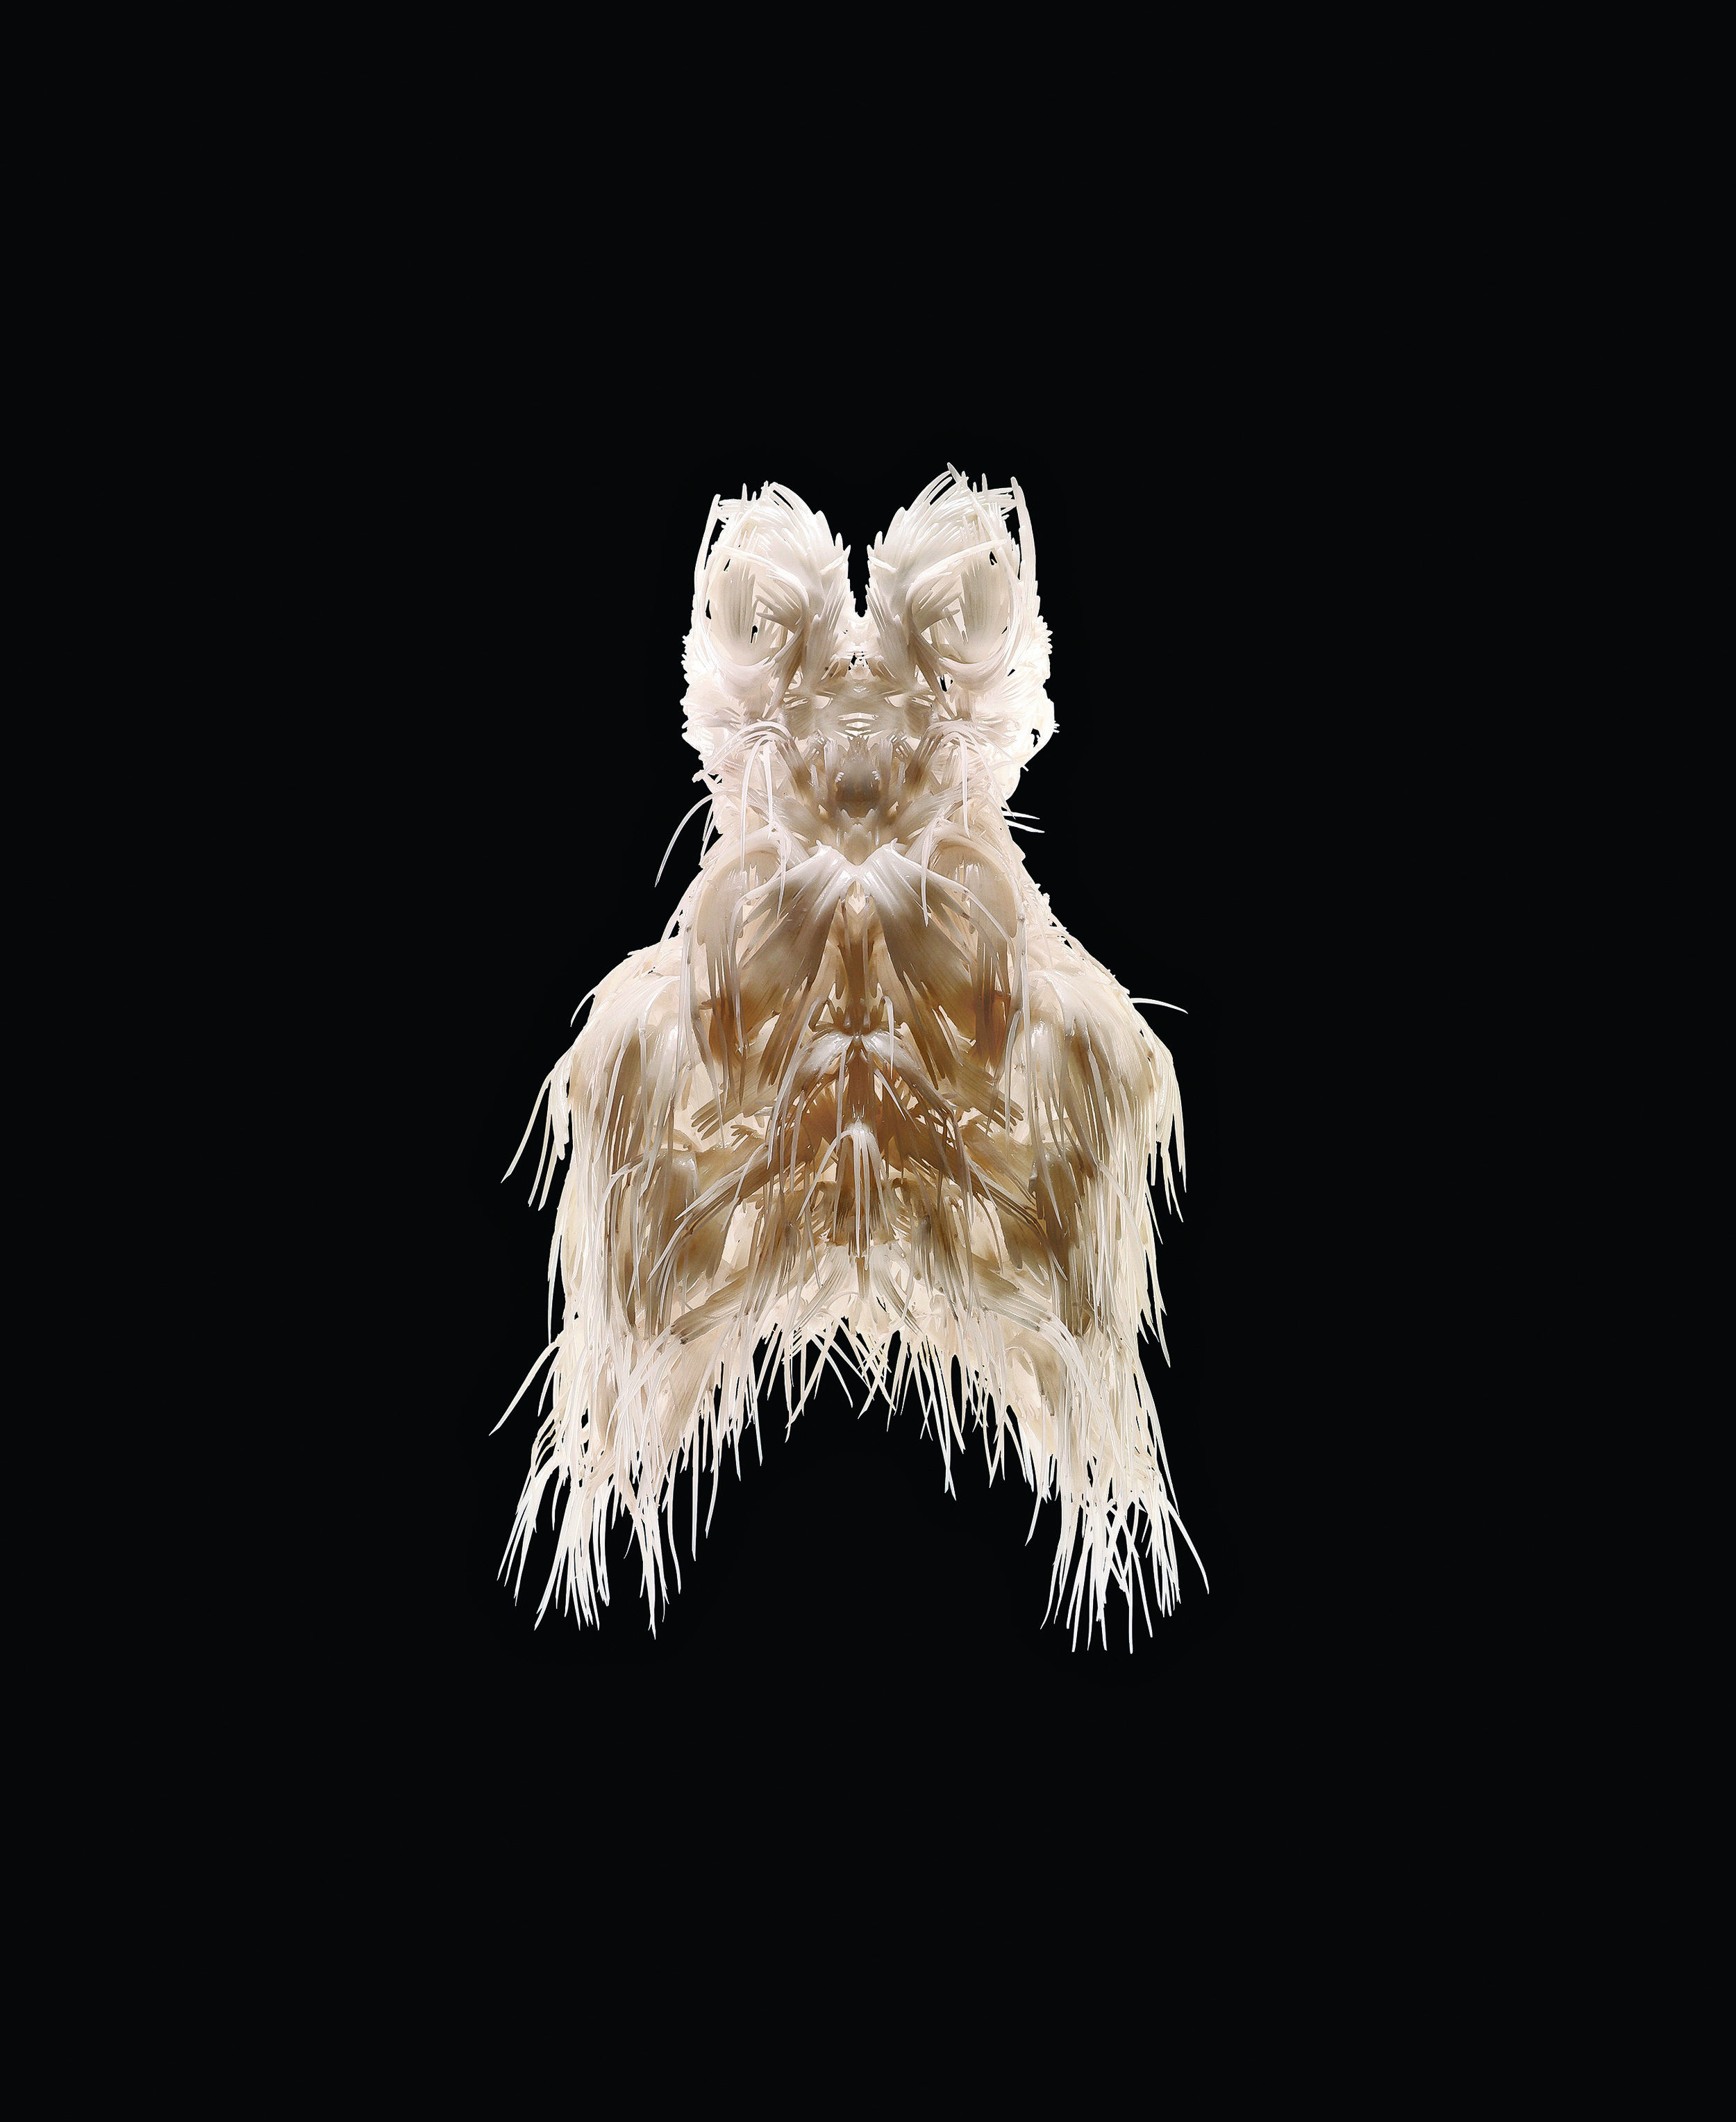  Iris van Herpen,&nbsp; Biopiracy ,&nbsp; Dress , March 2014. 3-D-printed thermoplastic polyurethane 92A-1 with silicon coating. In collaboration with Julia Koerner and Materialise. Collection of Phoenix Art Museum, Gift of Arizona Costume Institute.